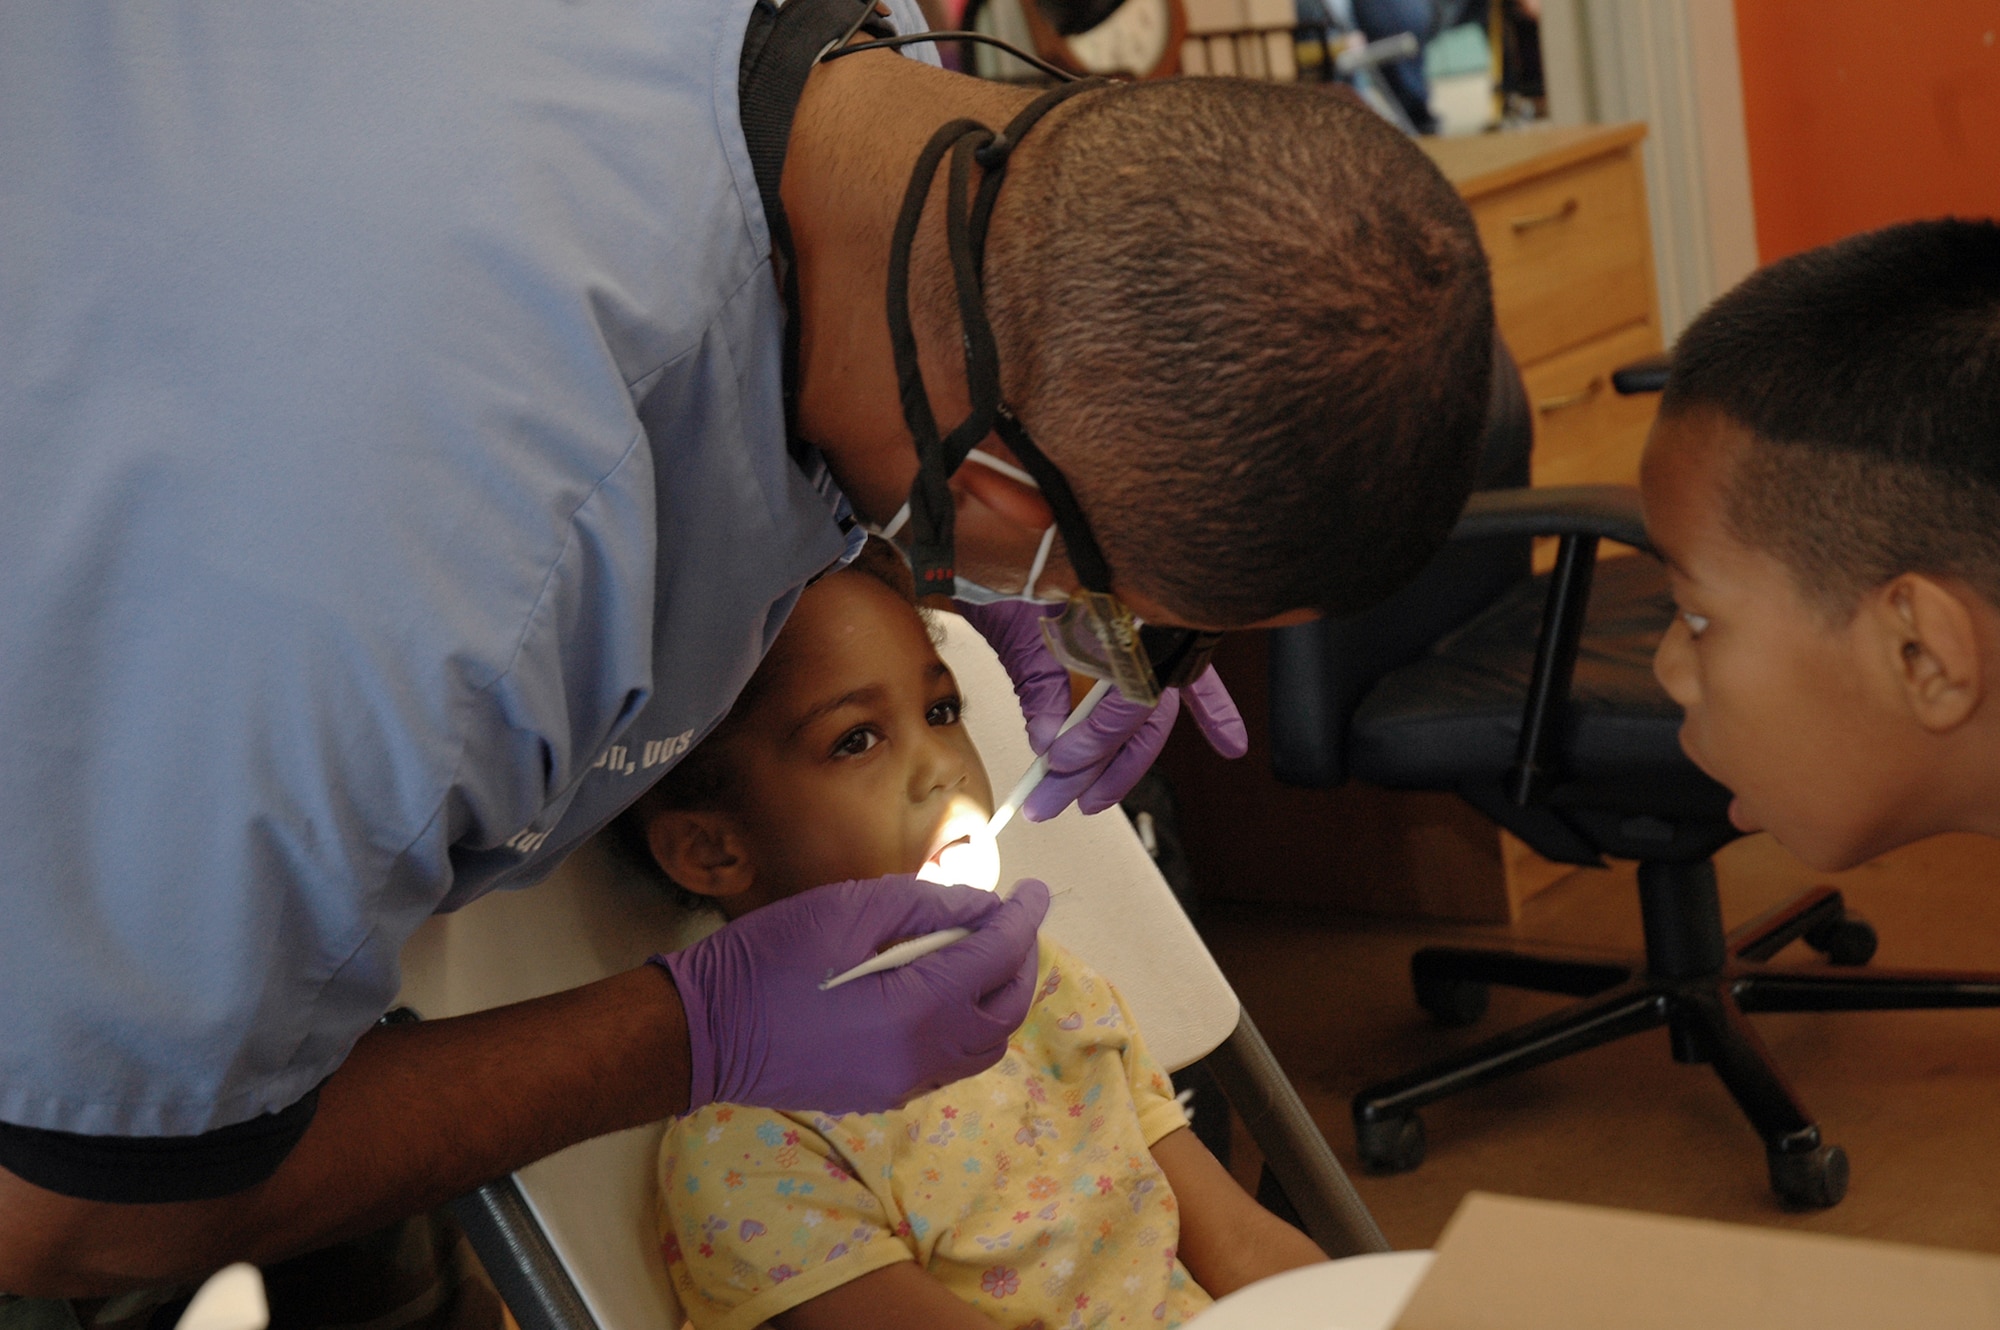 Maj. Stuart Thompson, 154th Medical Group, dentist, inspects young girl's teeth while her brother looks on during Hawaii Medical Innovative Readiness Training-community outreach in Waianae, Hawaii, July 16. Innovative Readiness Training is designed to give Guards members an opportunity to complete mission essential training while addressing community and civic needs. (U.S. Air Force photo/Tech. Sgt. Betty J. Squatrito-Martin)